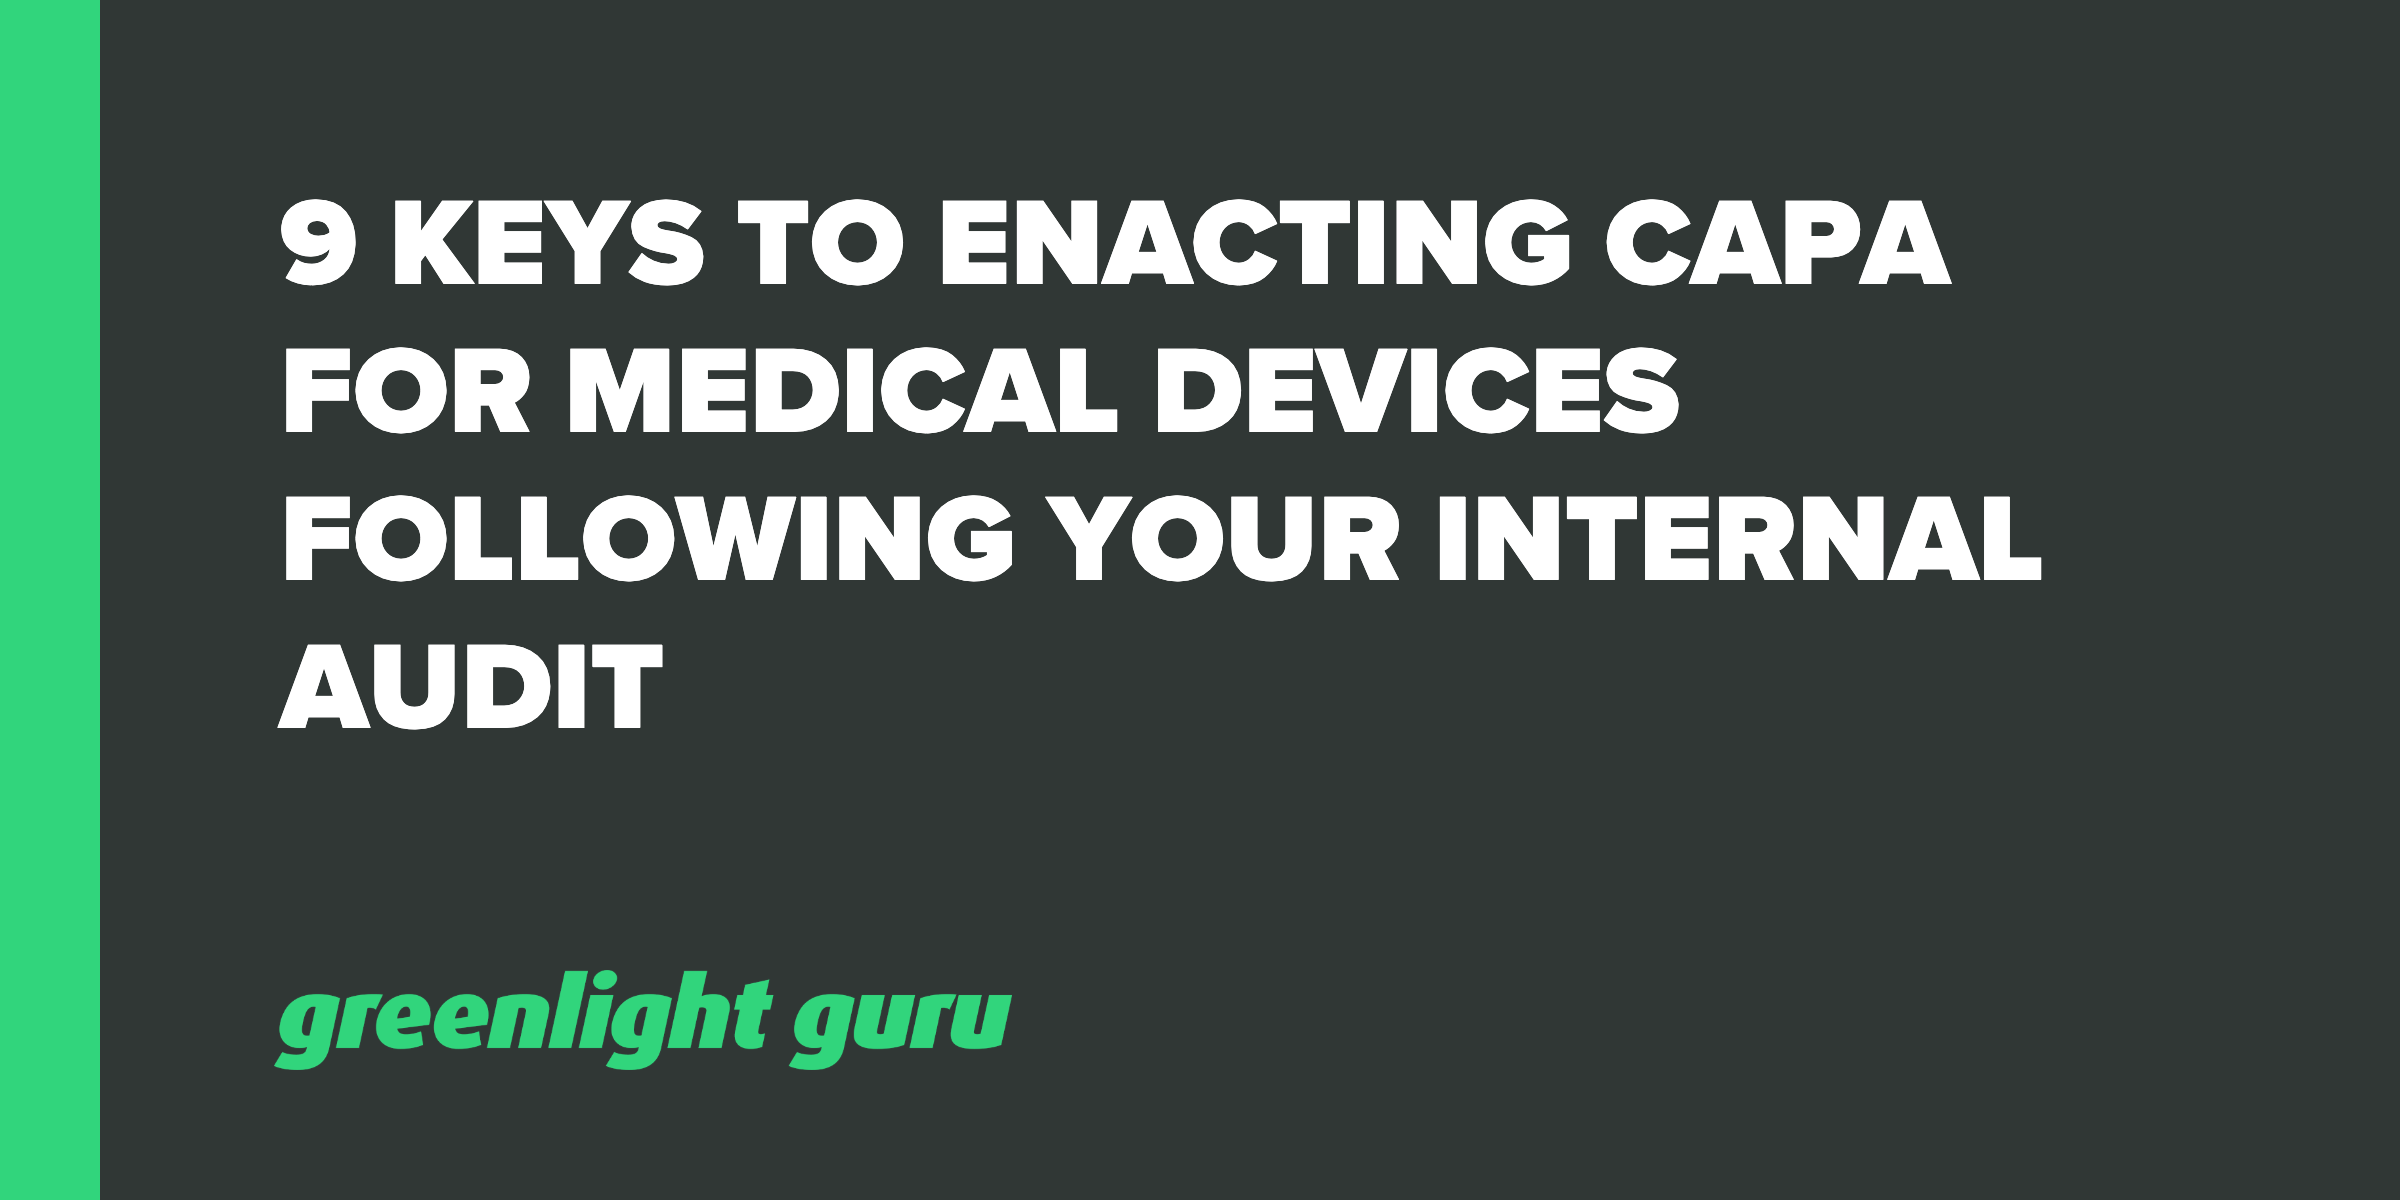 9 Keys To Enacting Capa For Medical Devices Following Your Internal Audit